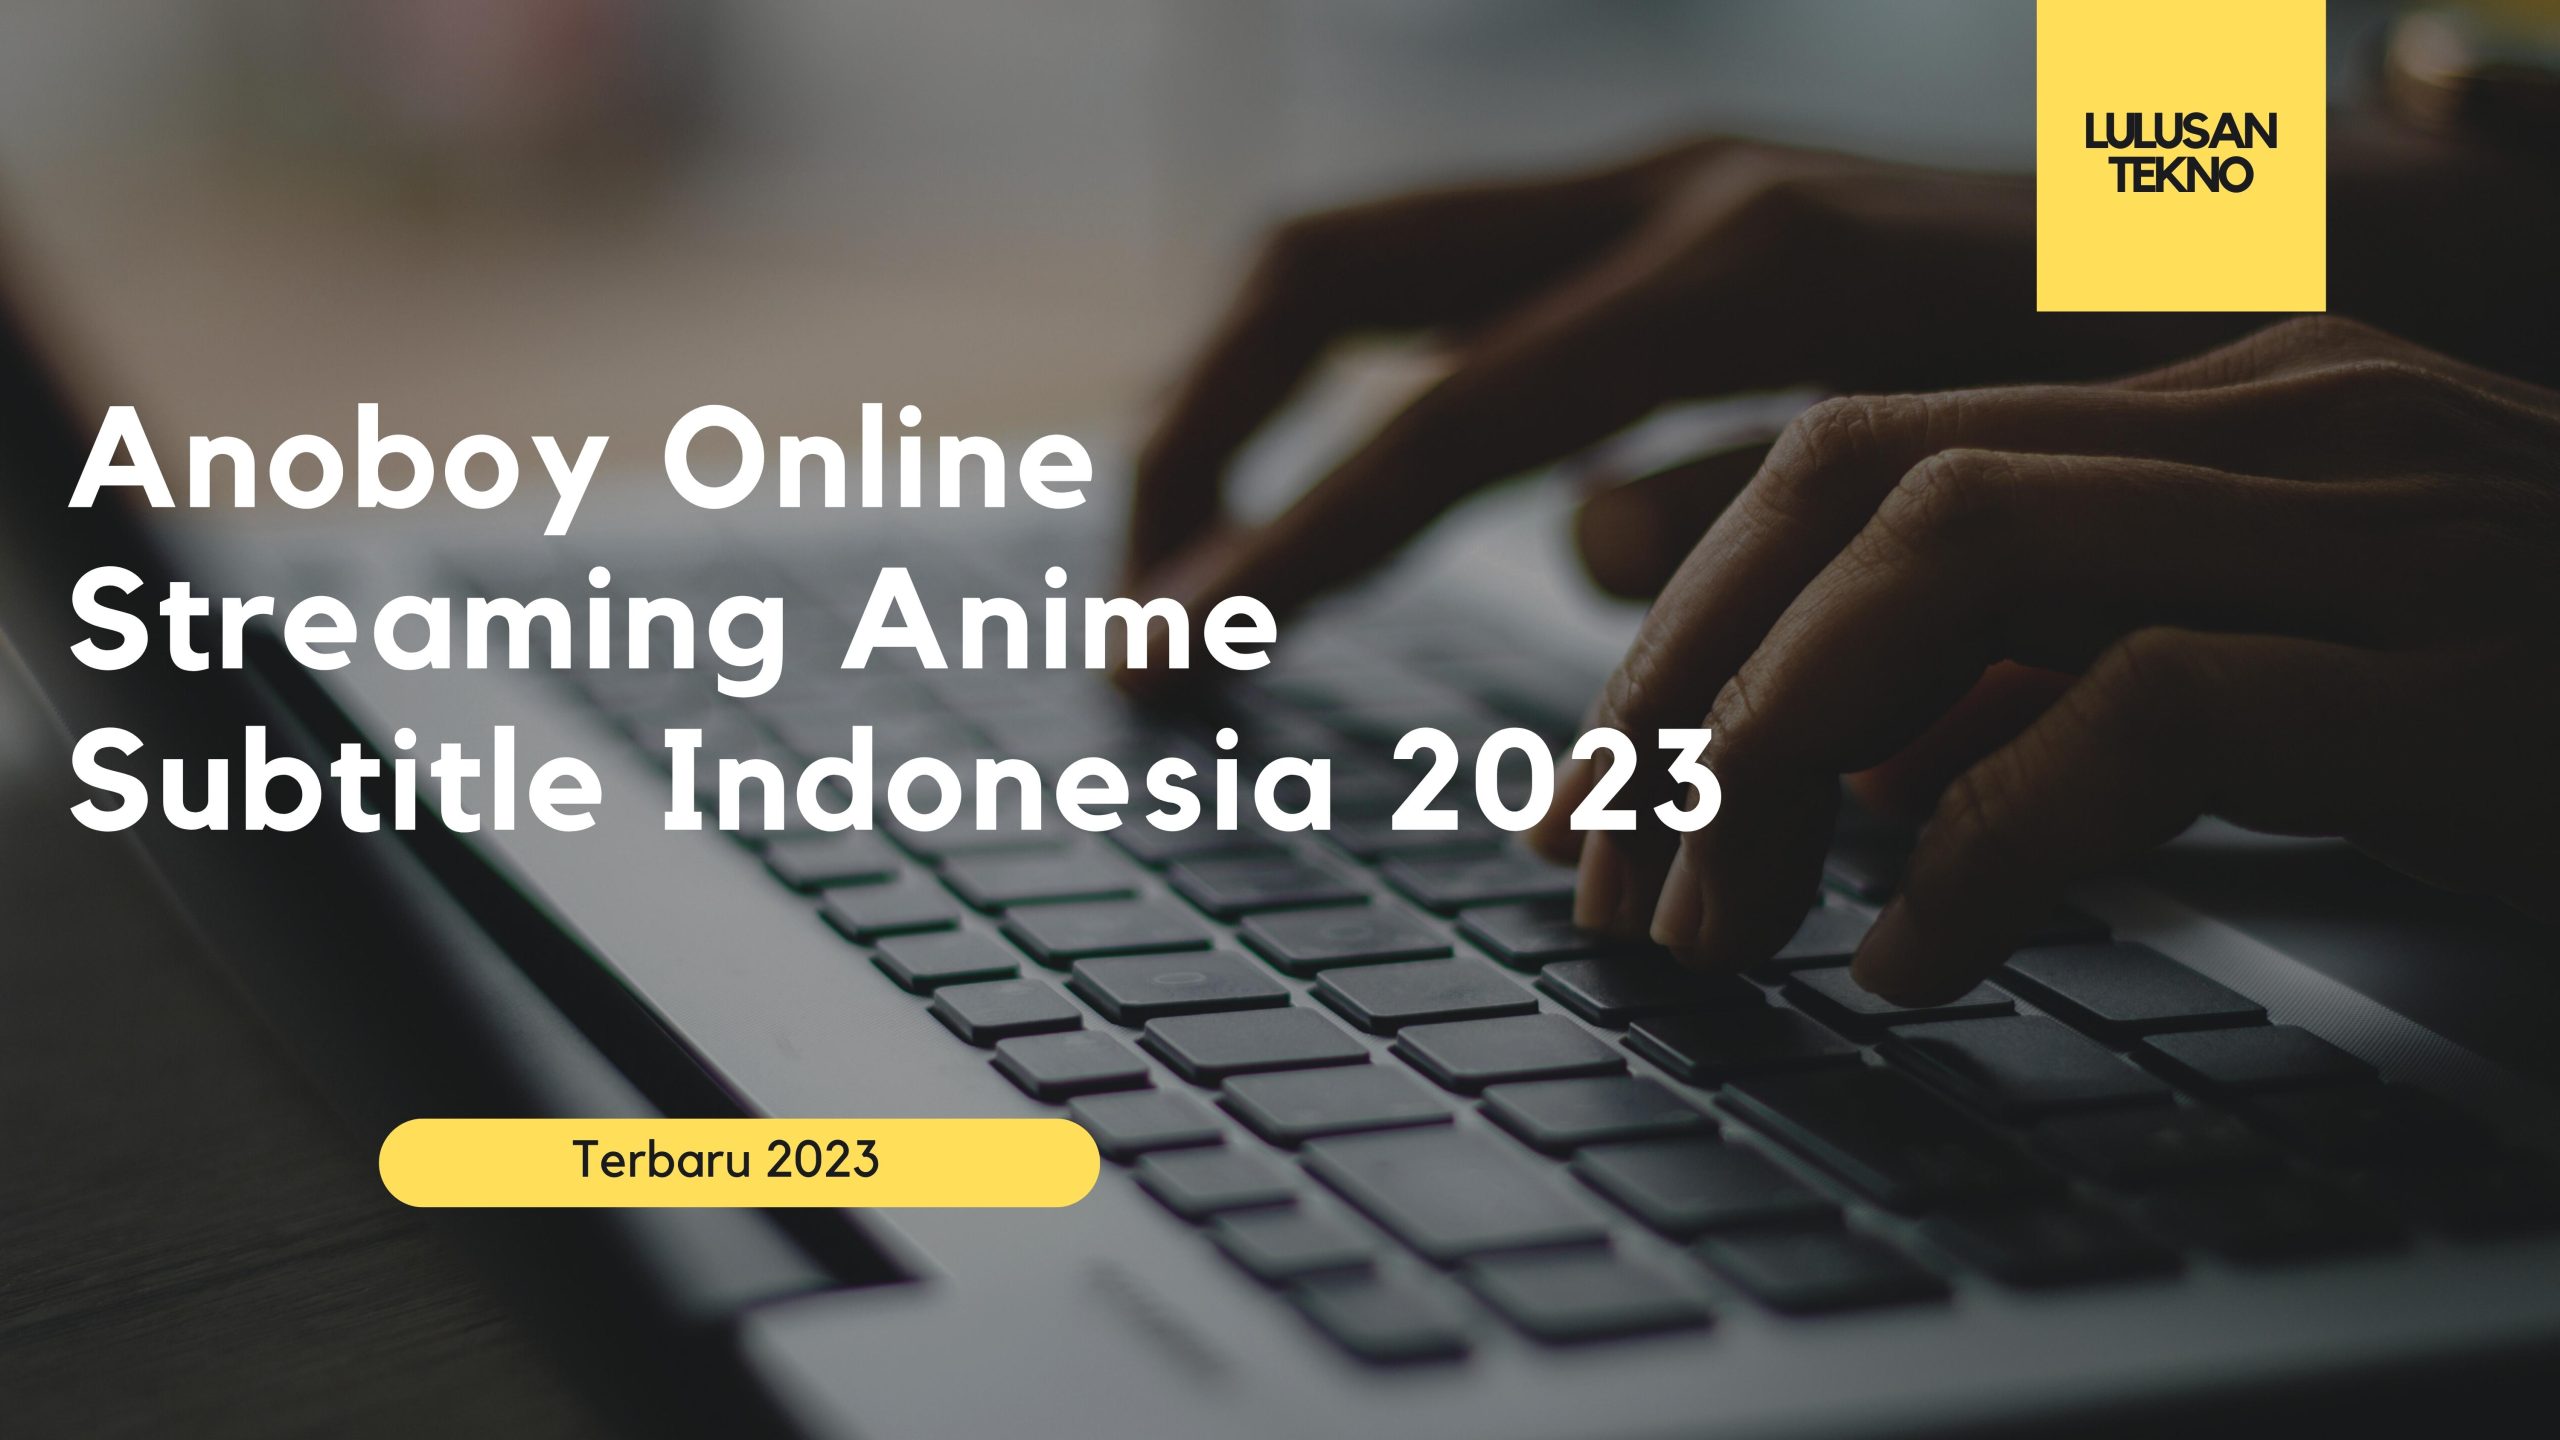 Anoboy Online Streaming Anime Subtitle Indonesia 2023